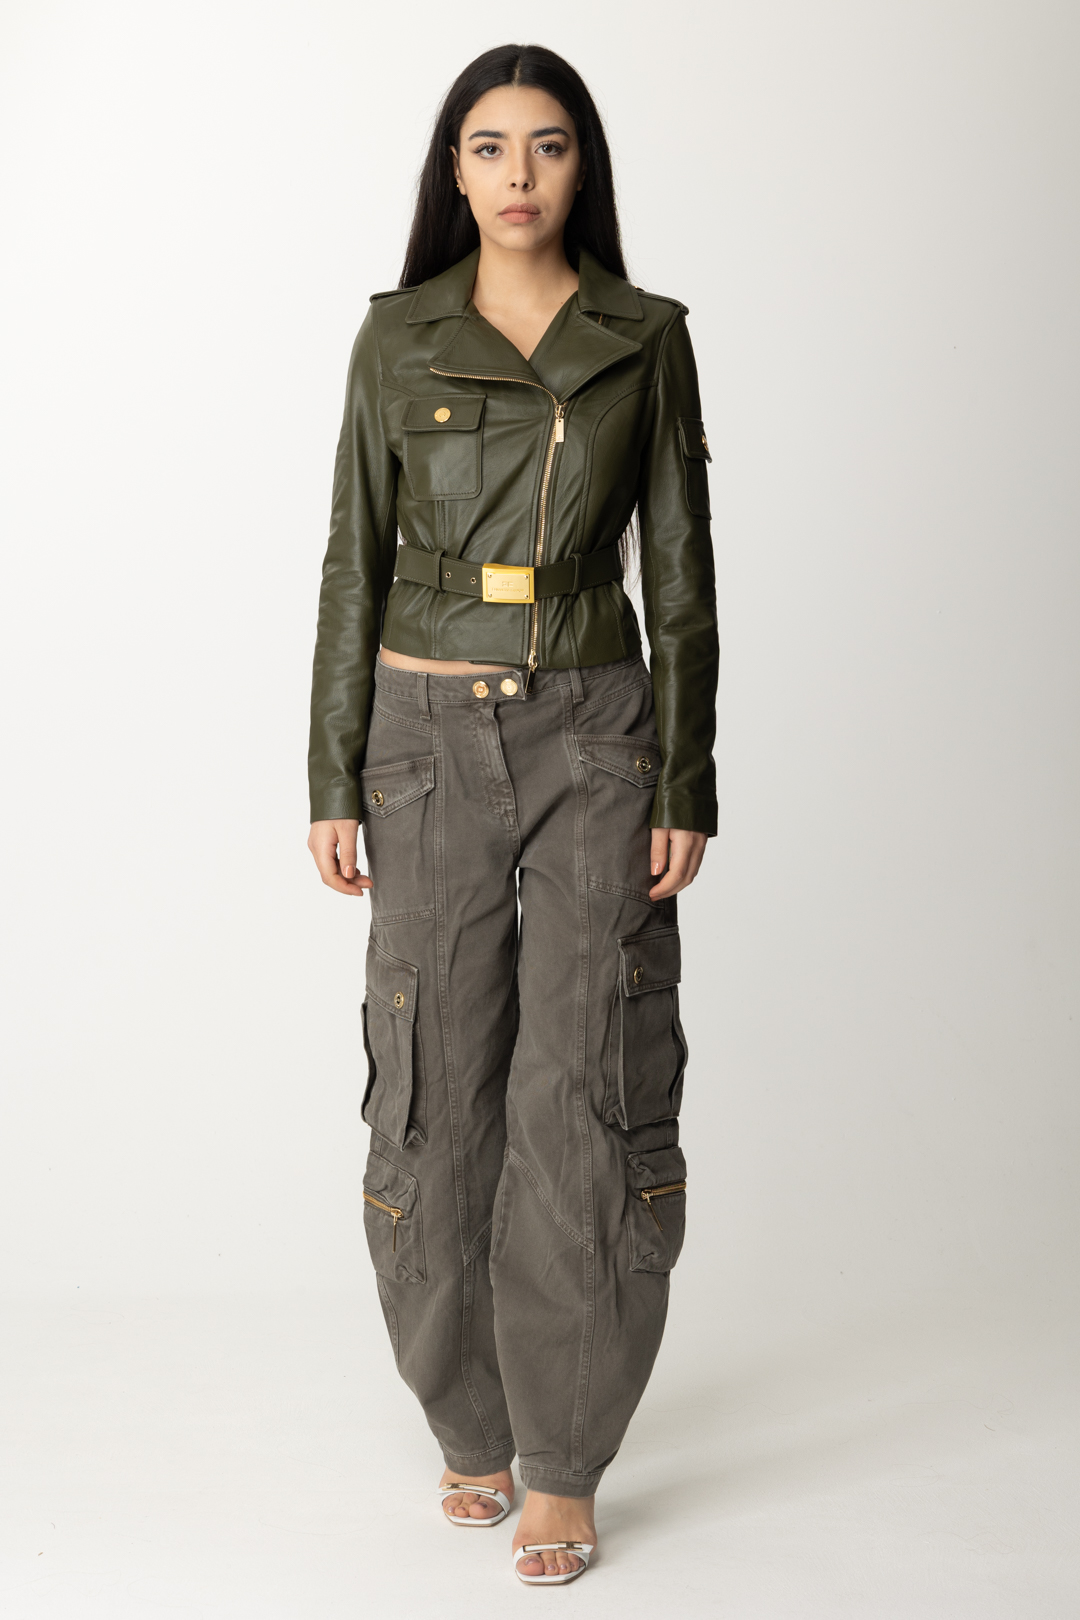 Preview: Elisabetta Franchi Short leather jacket with belt ARMY